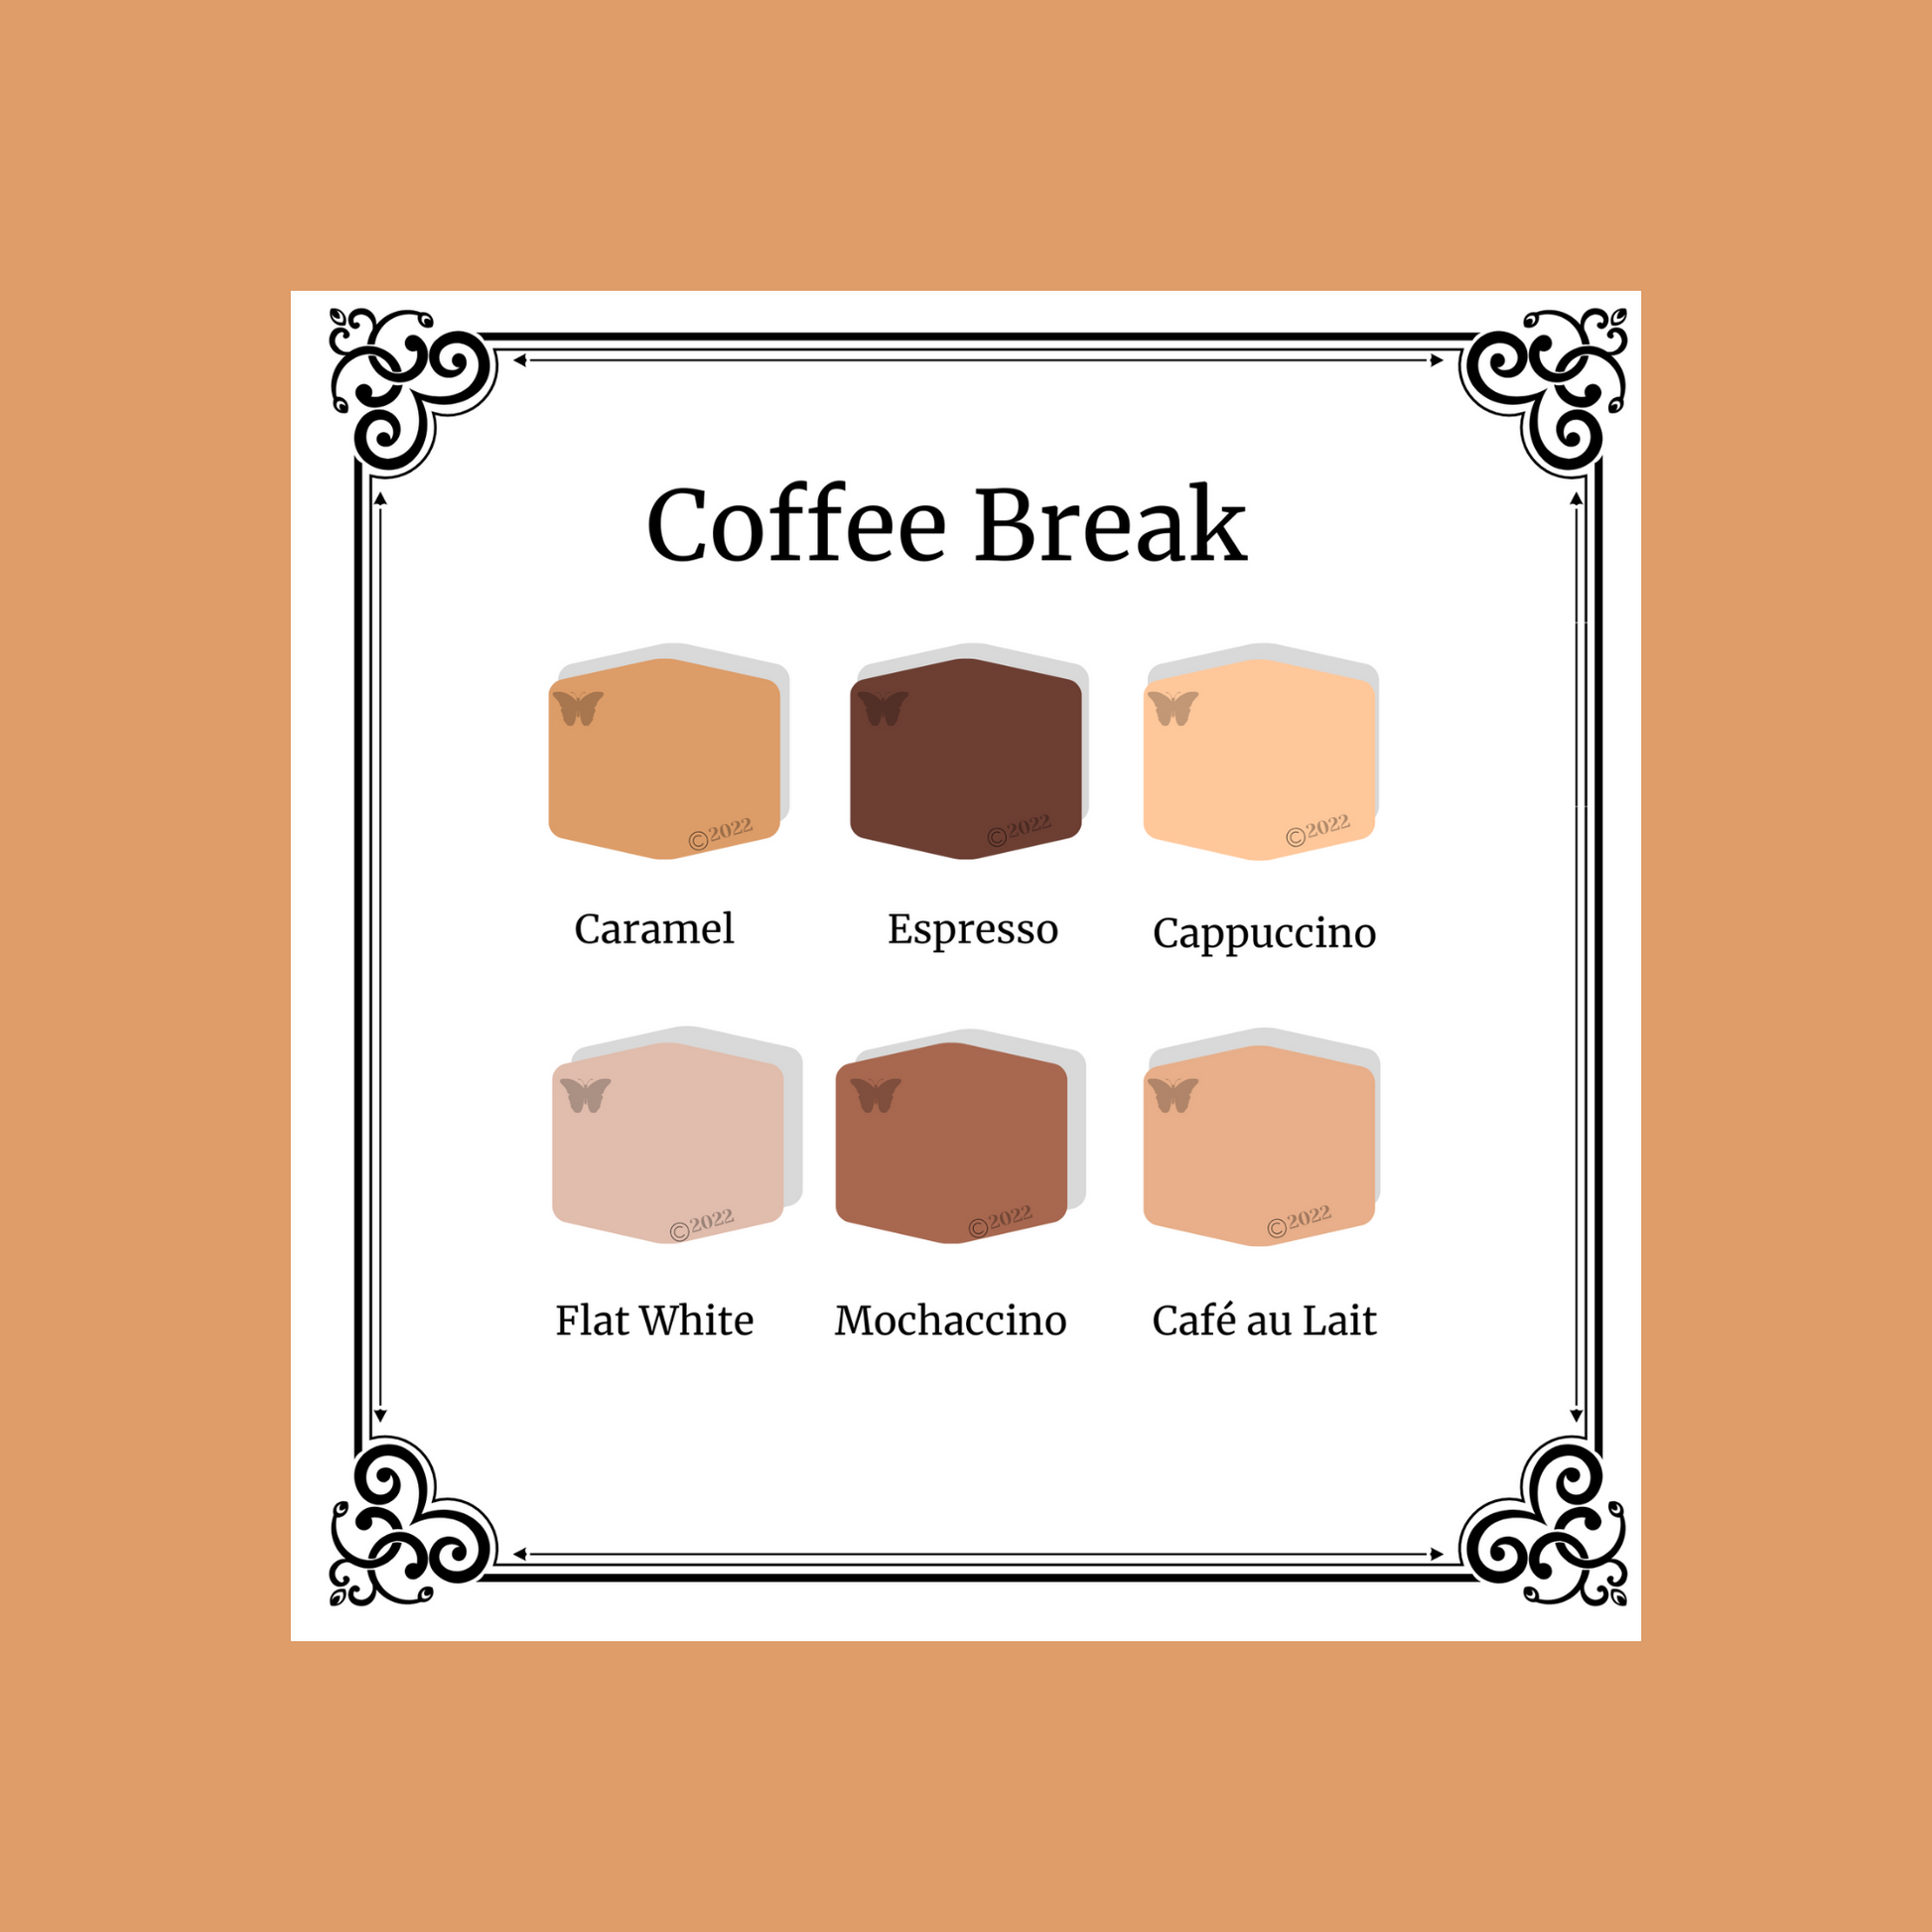 Coffee Break Palette showing all 6 colors on a caramel background